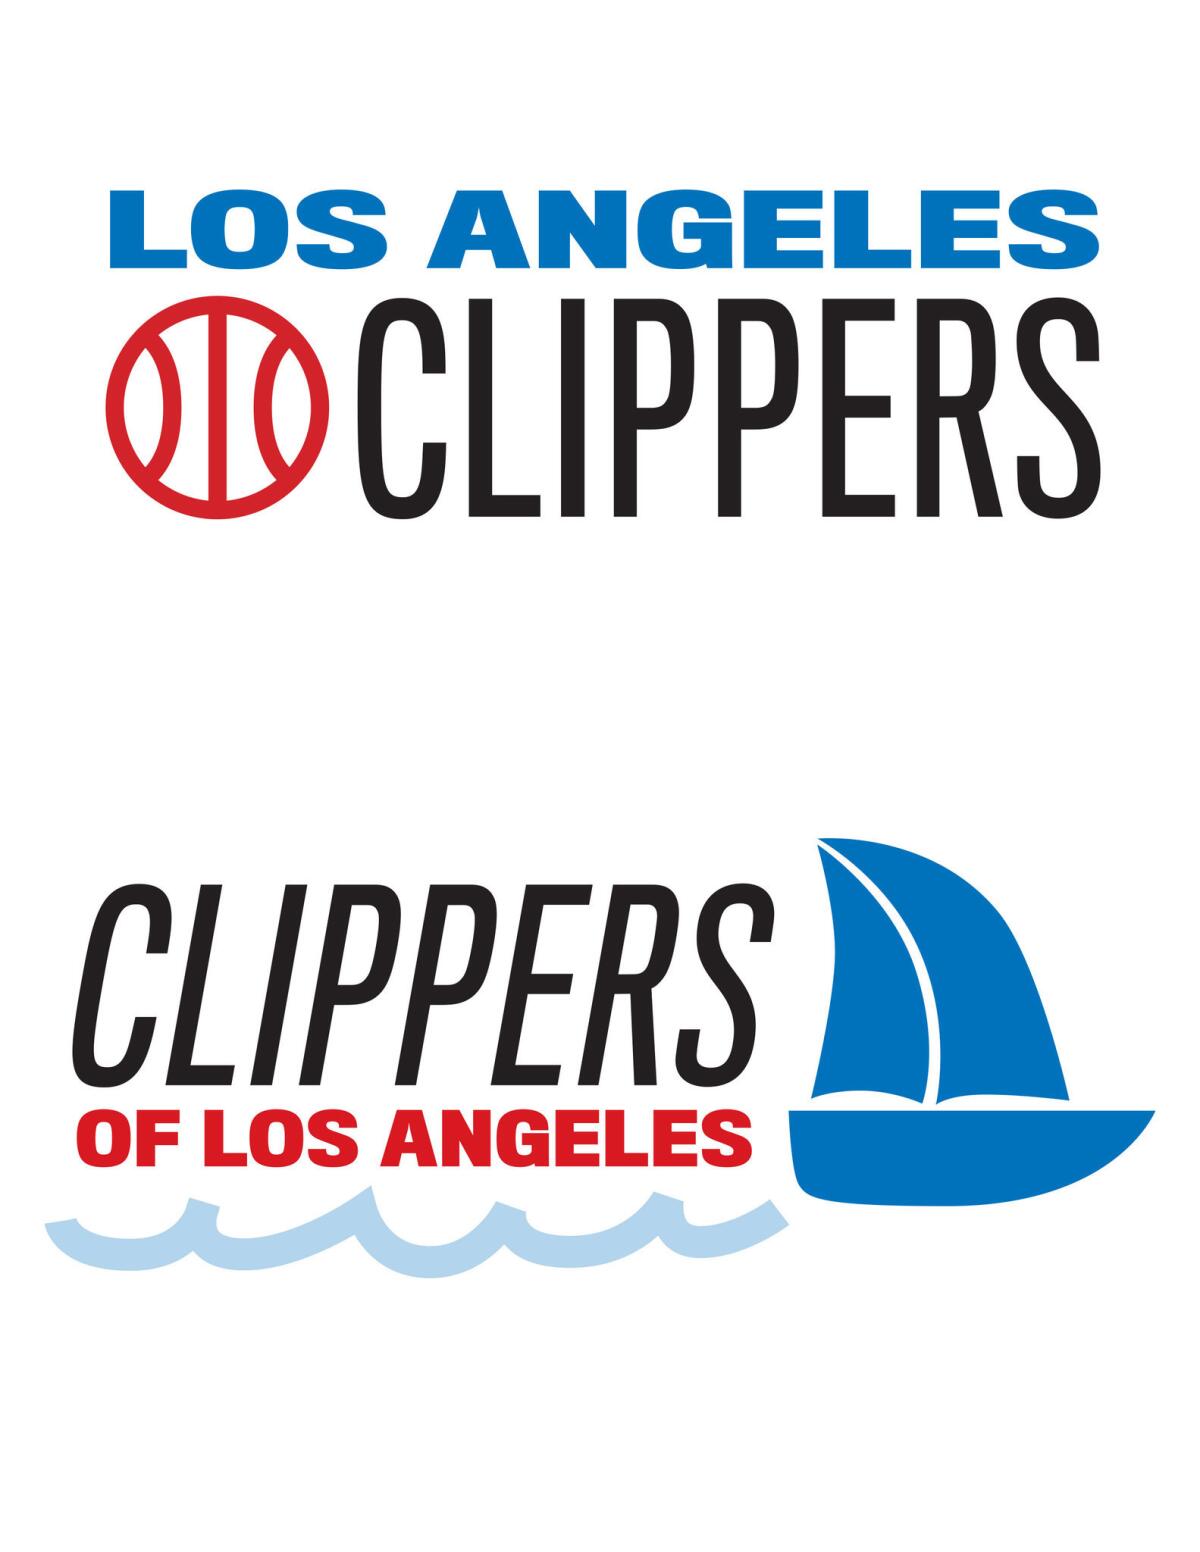 Times designer Alison Hong tried her hand at creating a new logo for the Clippers. What do you think?